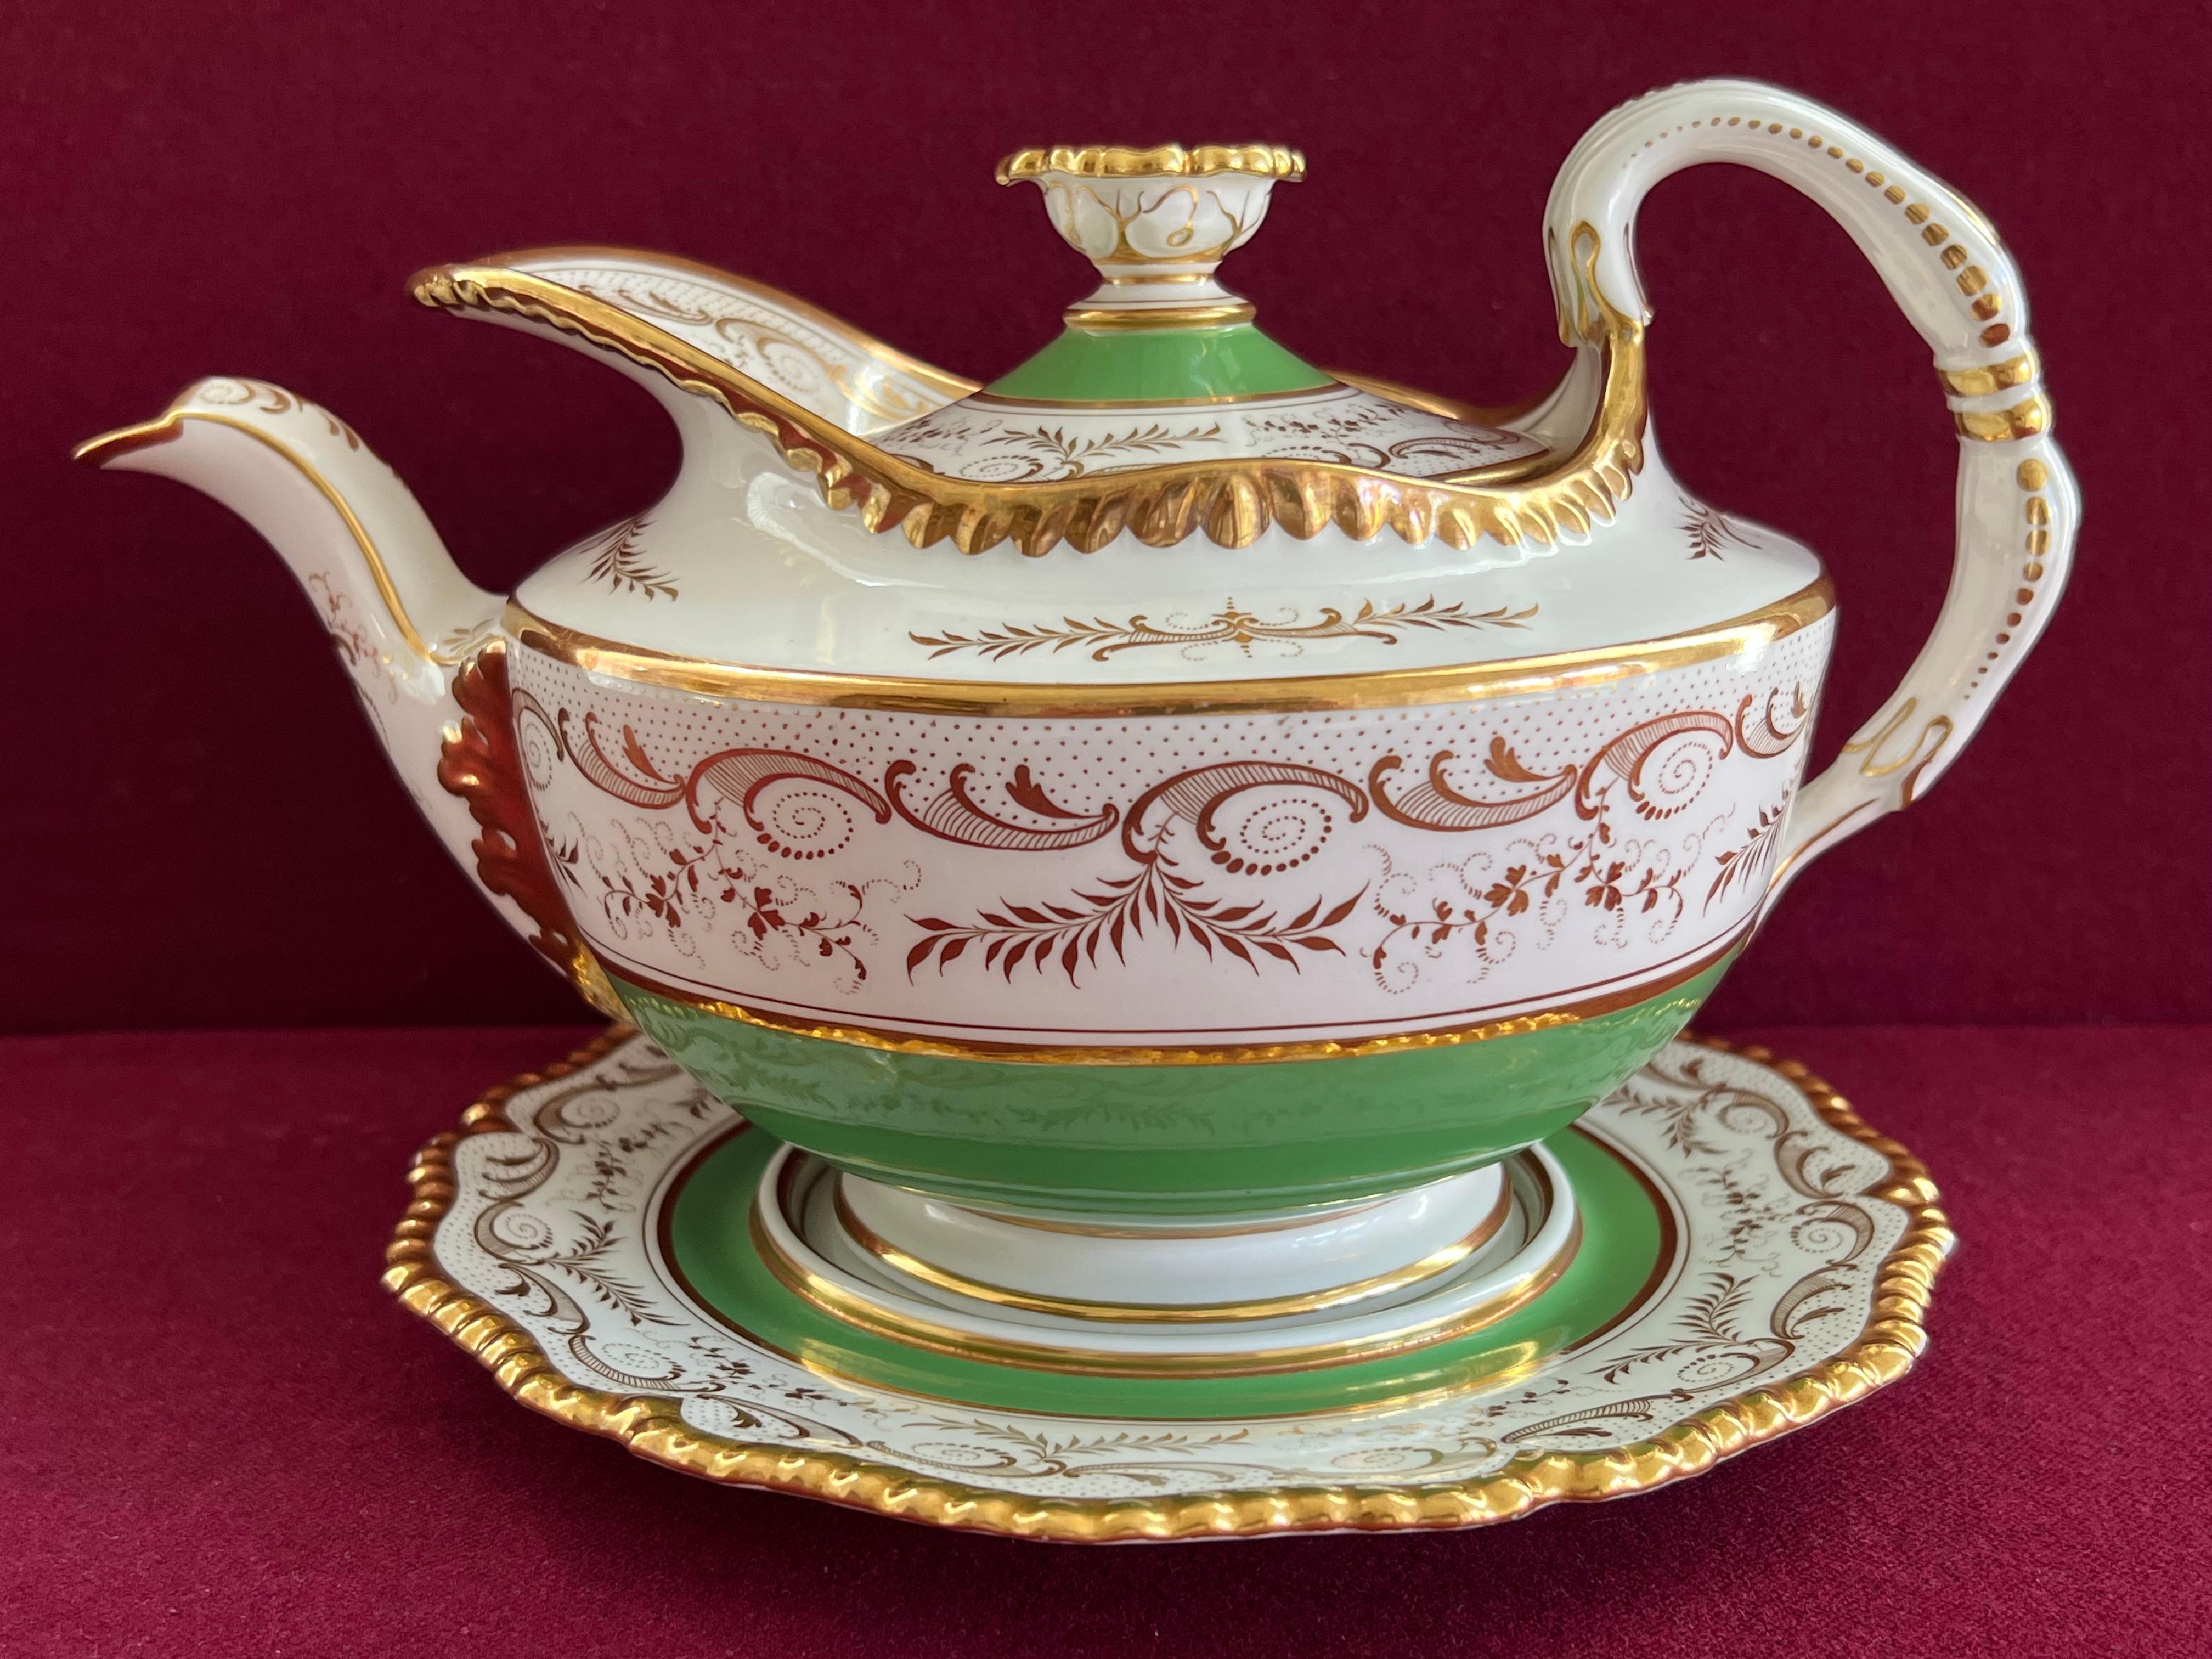 A wonderful Flight Barr & Barr Worcester Porcelain Tea & Coffee Set c.1820-30. Gilt gadrooned edge, lime green ground and stylised gilt motifs.

Consisting of:

1 Teapot & Stand

2 Plates

10 Tea cups

10 Coffee cups 

15 Saucers 

1